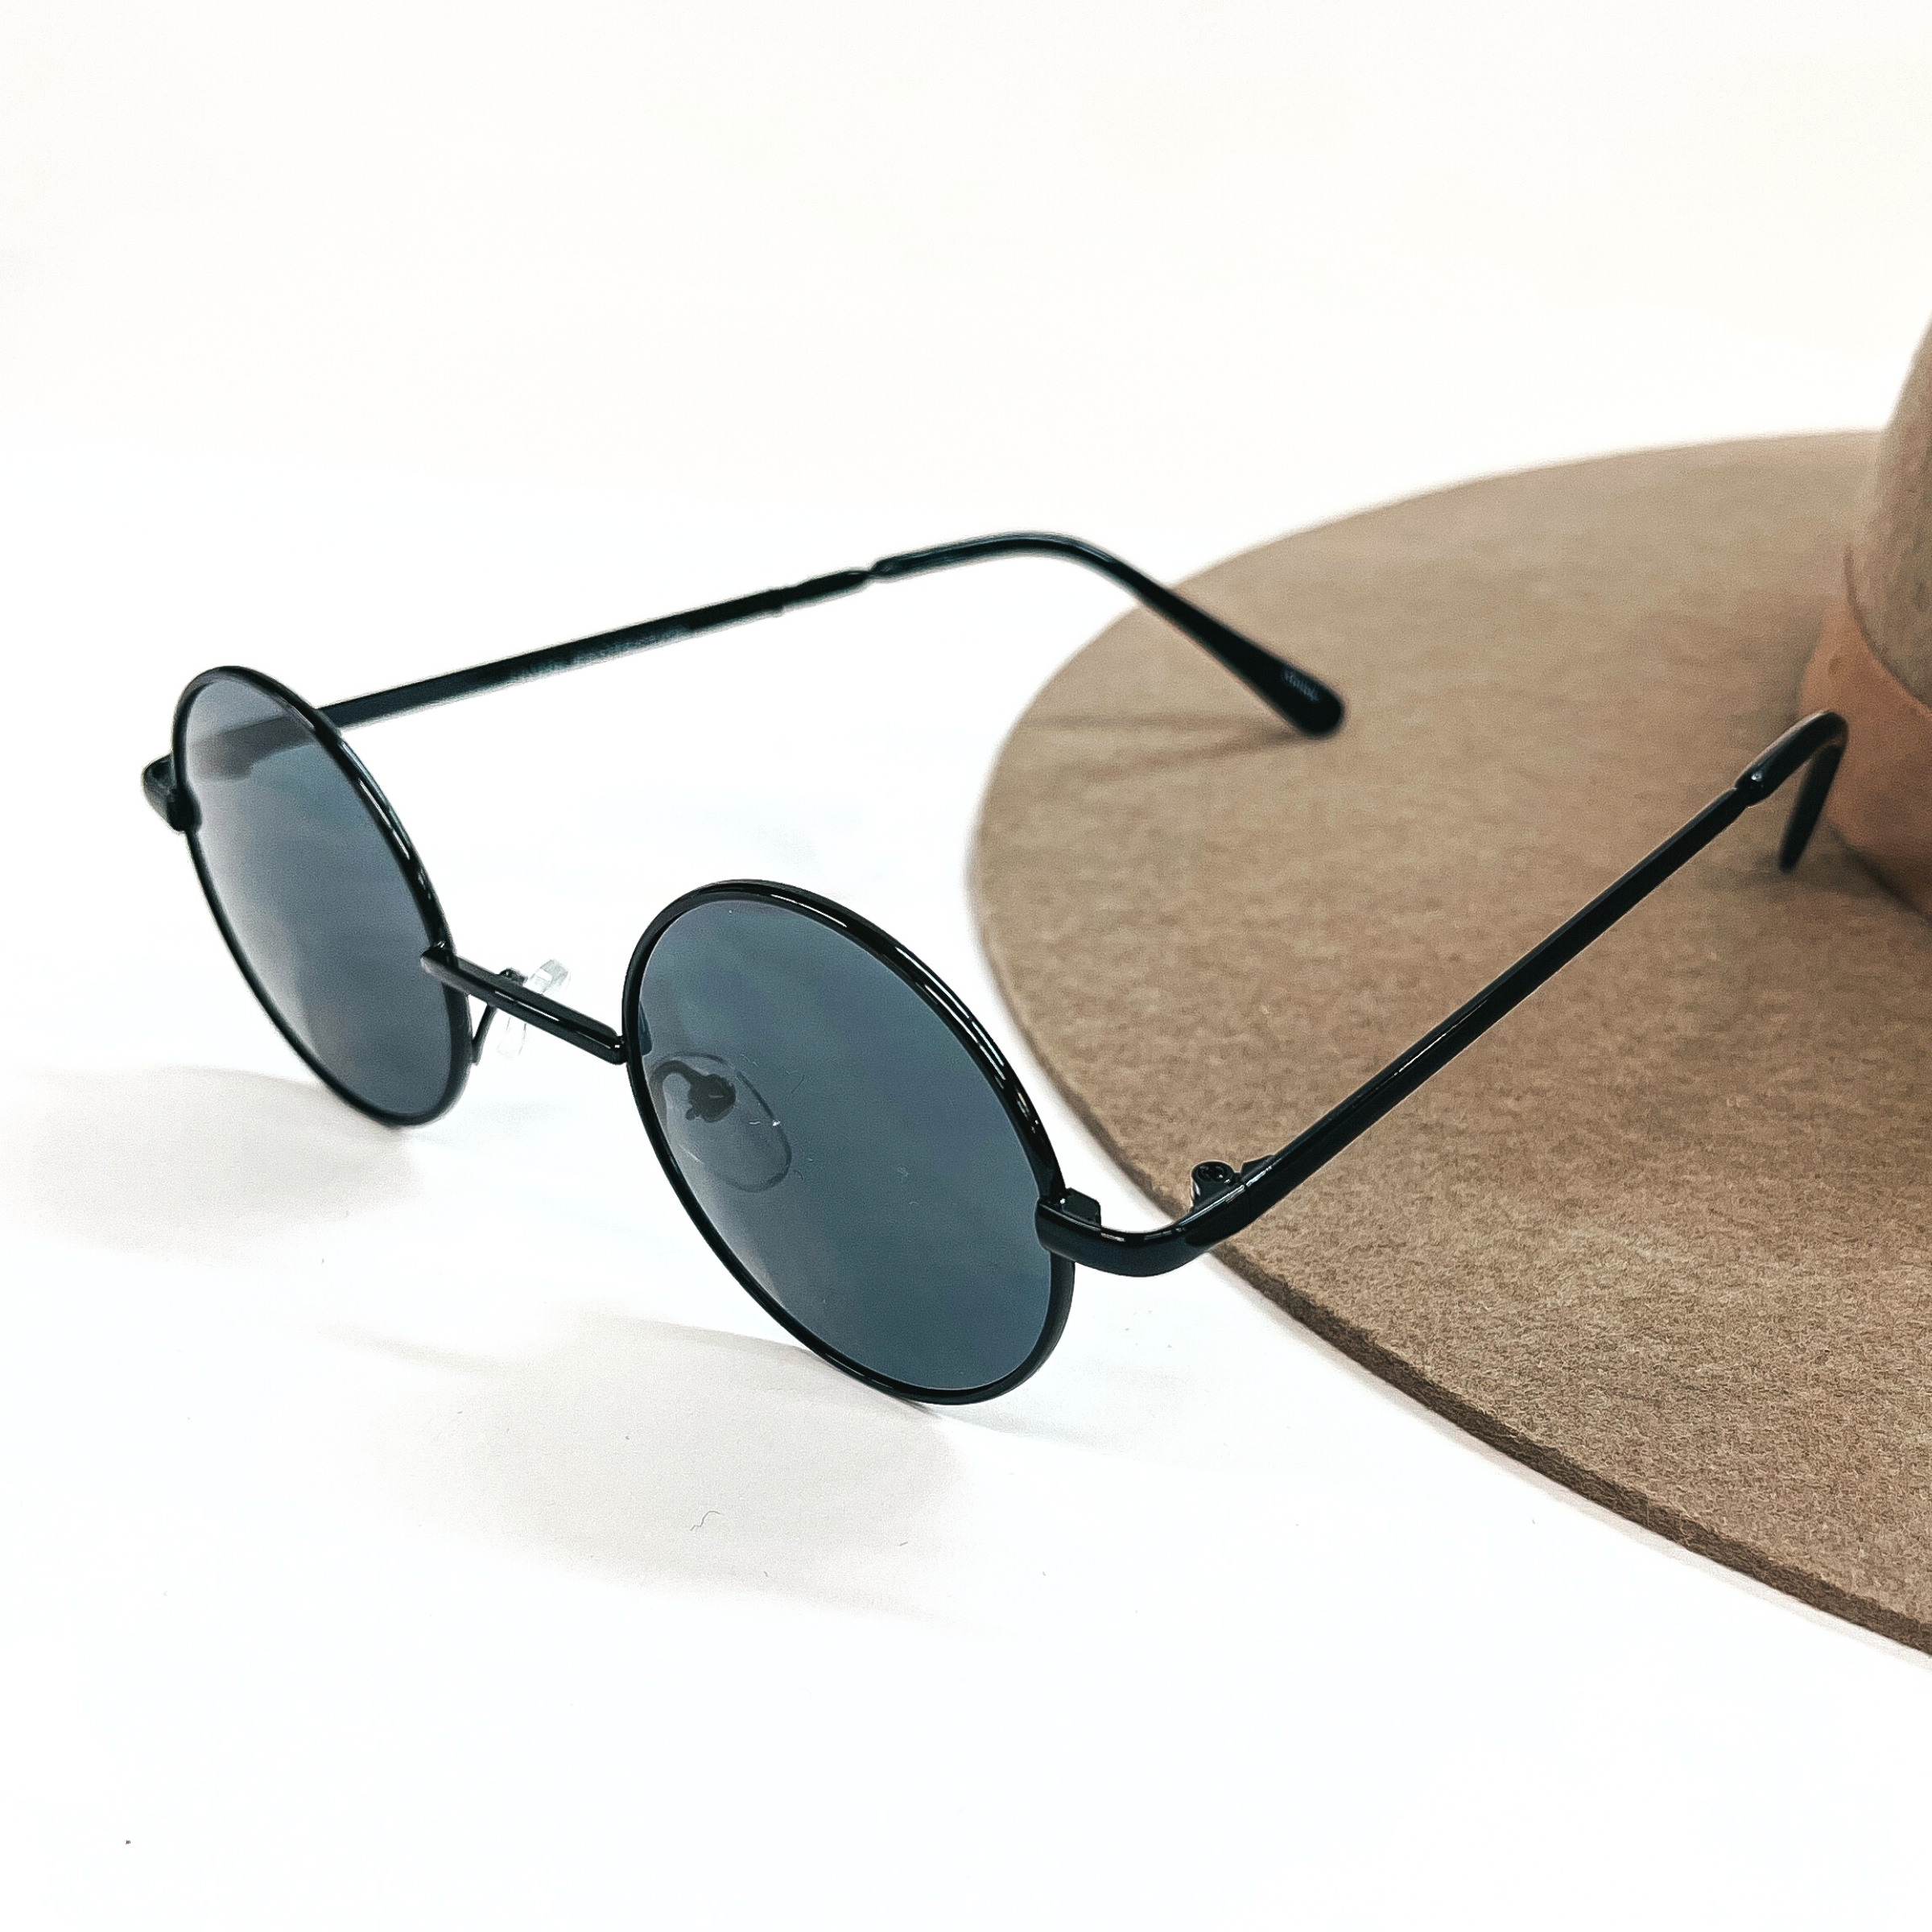 These are small circle sunglasses with black/dark grey lenses and a black outline/frame. These sunglasses are taken on a a white background and on a brown felt hat brim.